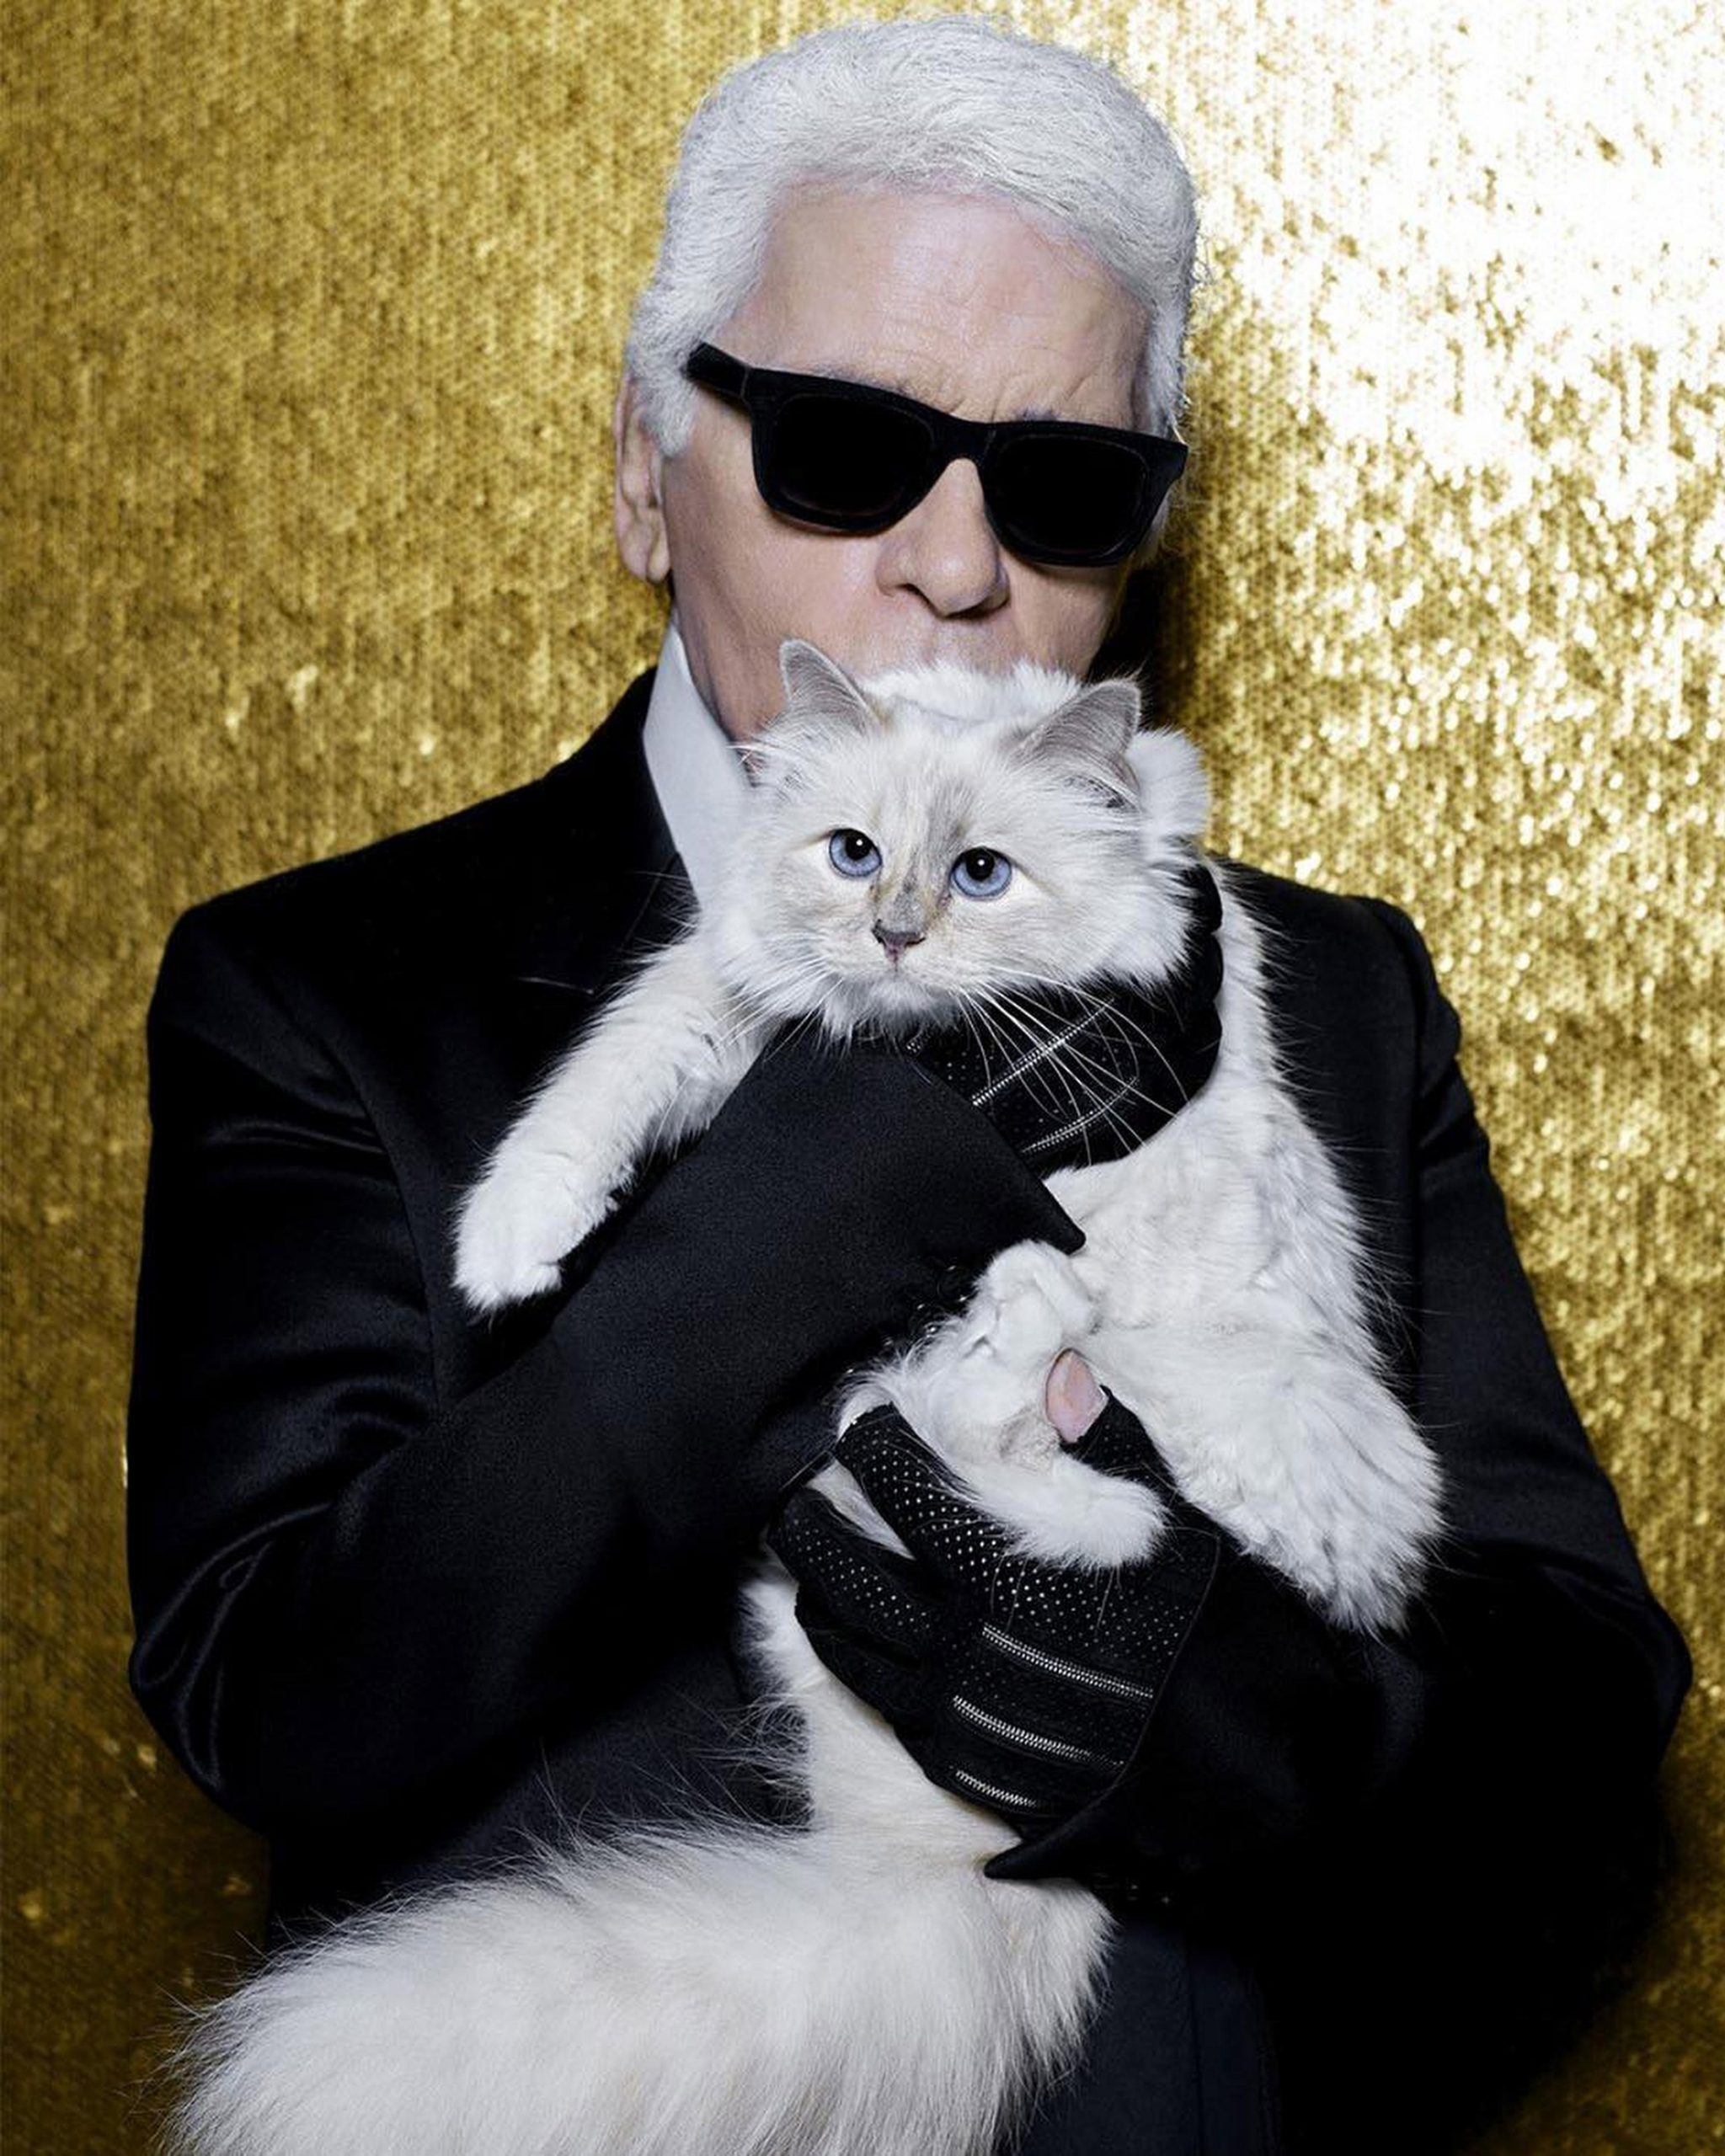 Choupette was the beloved cat of the late fashion designer Karl Lagerfeld